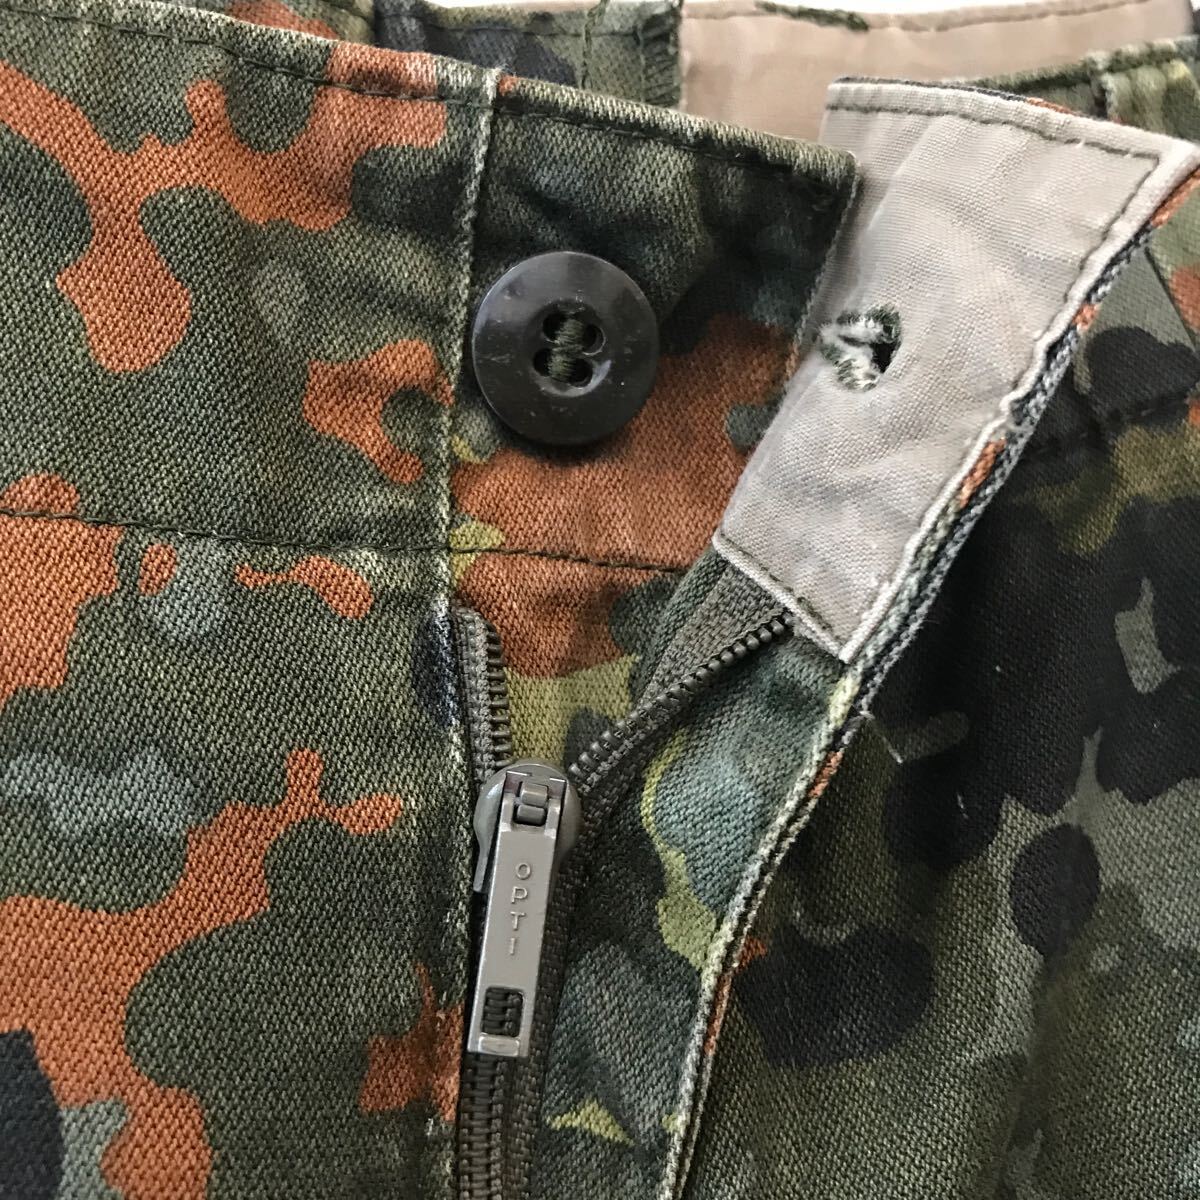 90s Germany army the truth thing frekta- duck pants camouflage cargo pants W34 L29 euro Vintage military OPTI one-side nail CARGO PANTS 80s